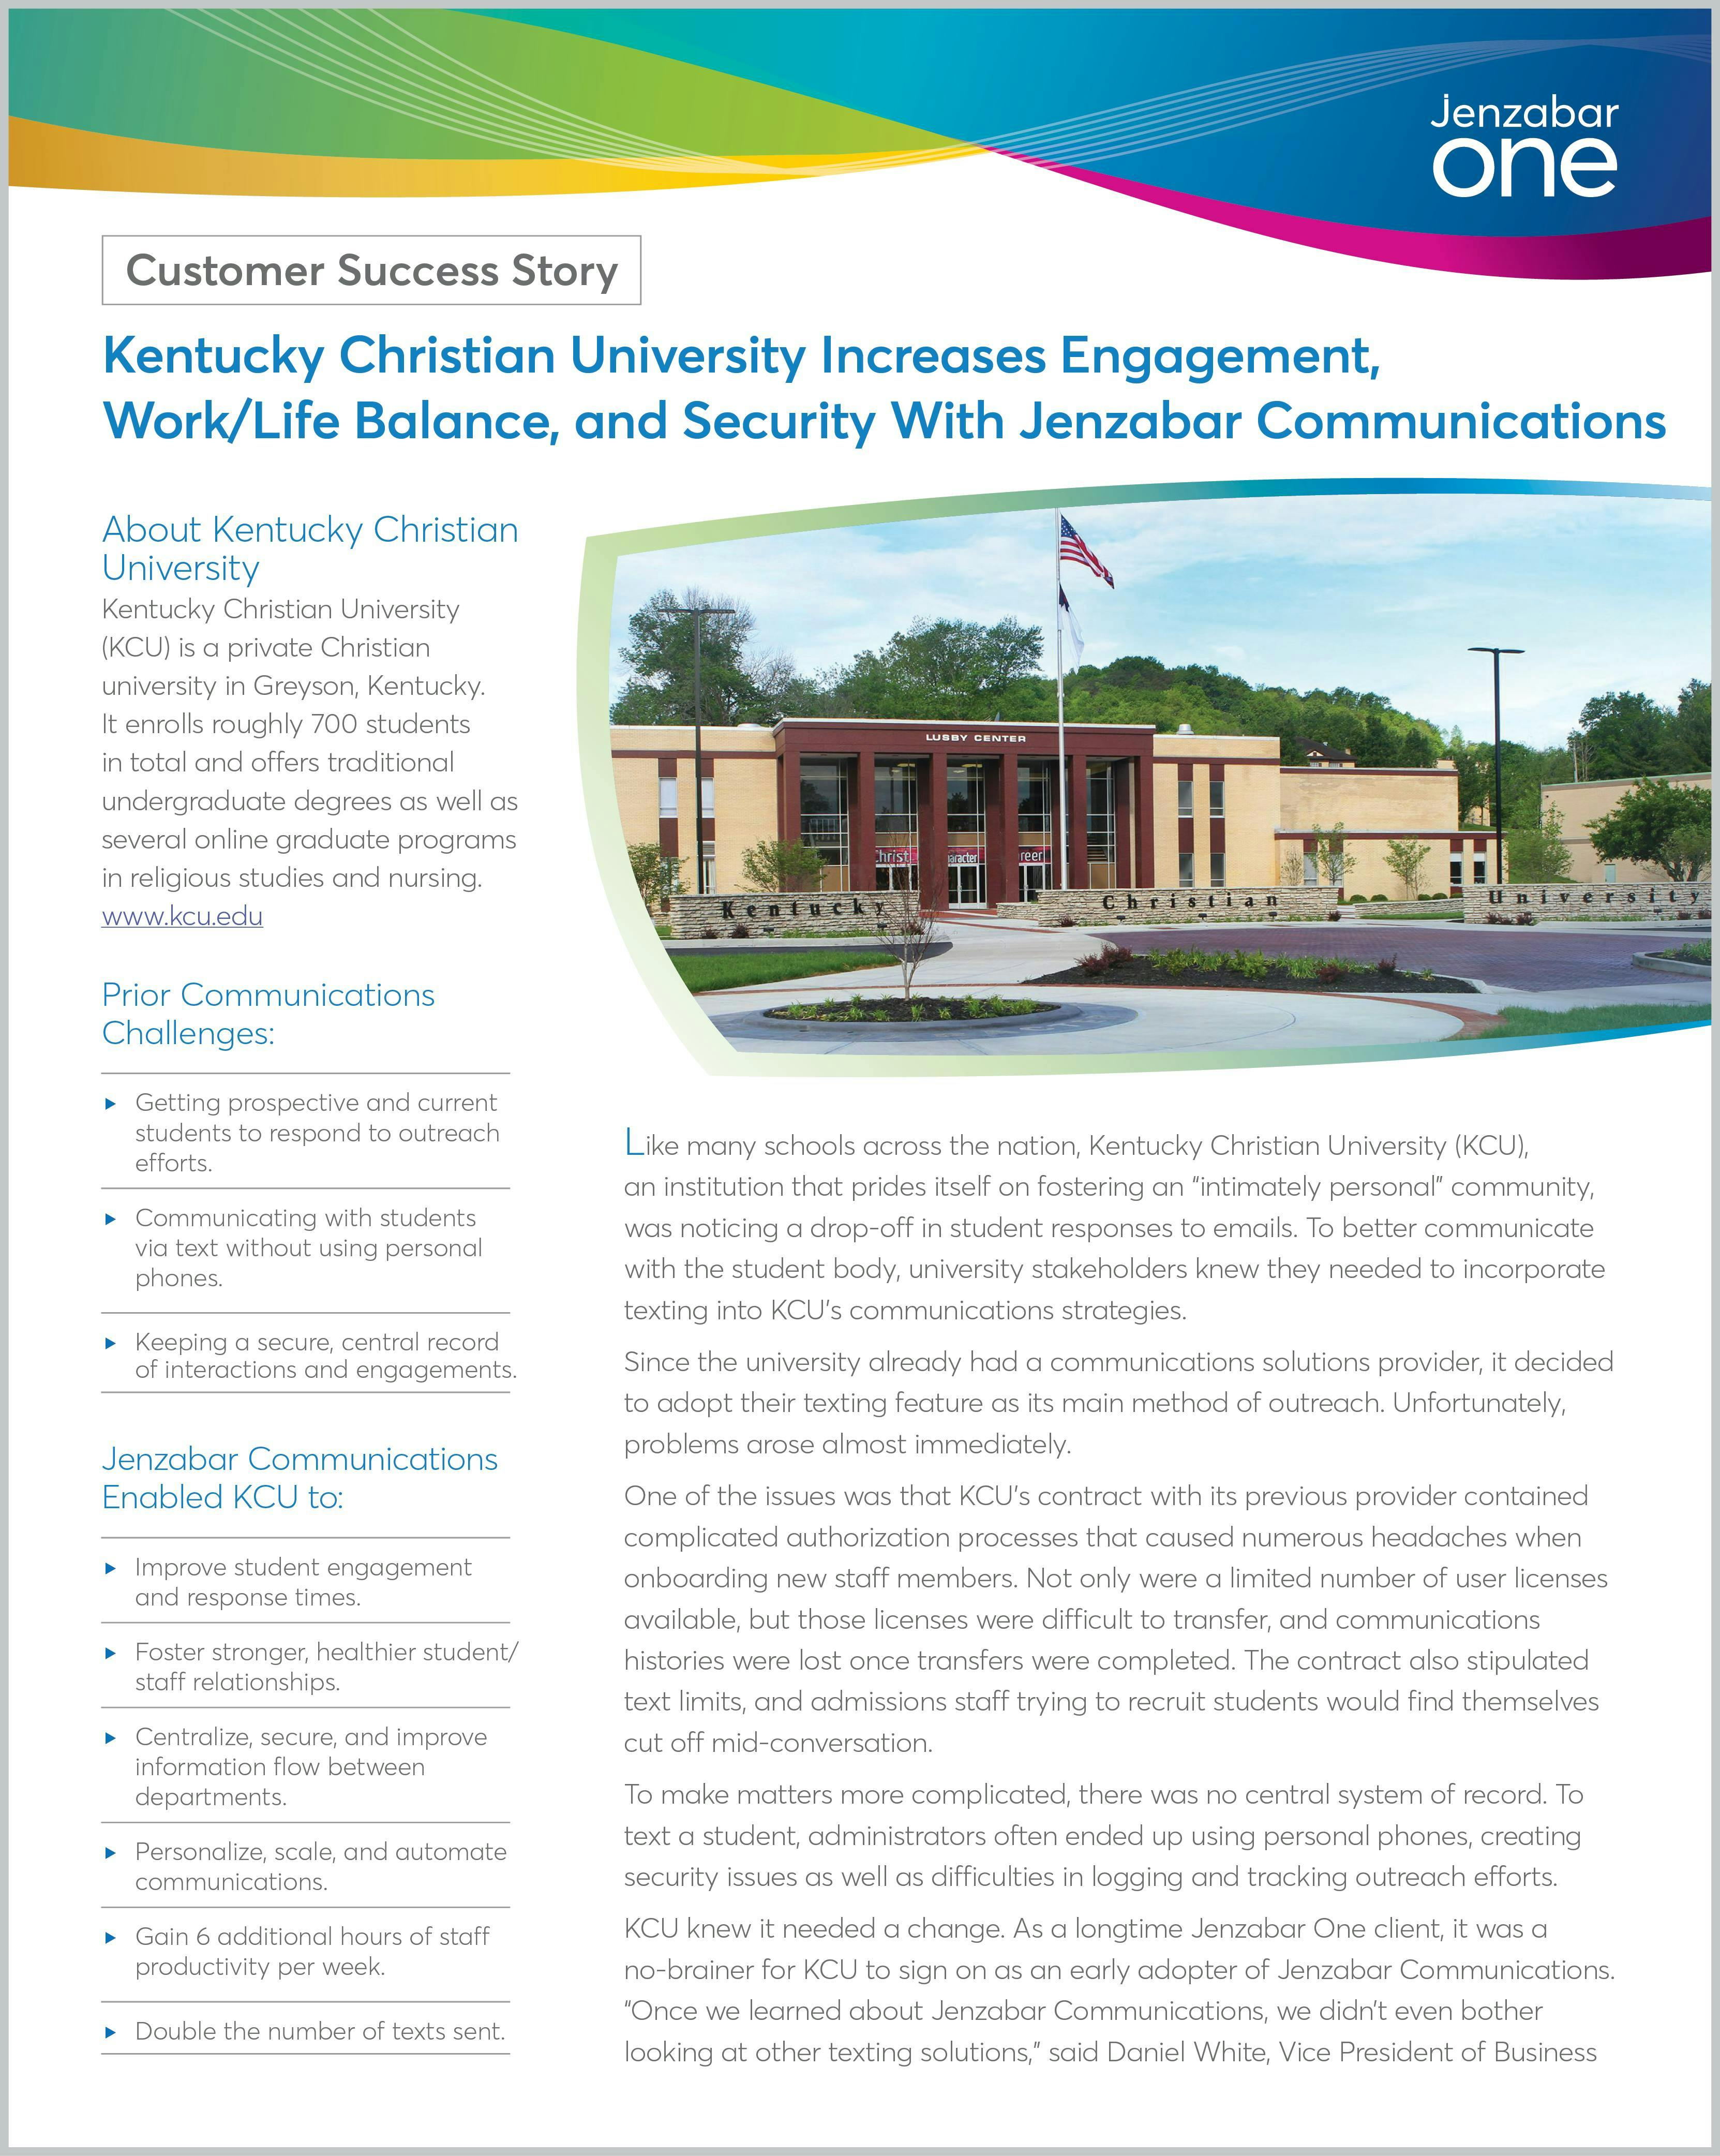 Kentucky Christian University Increases Engagement, Work/Life Balance, and Security With Jenzabar Communications